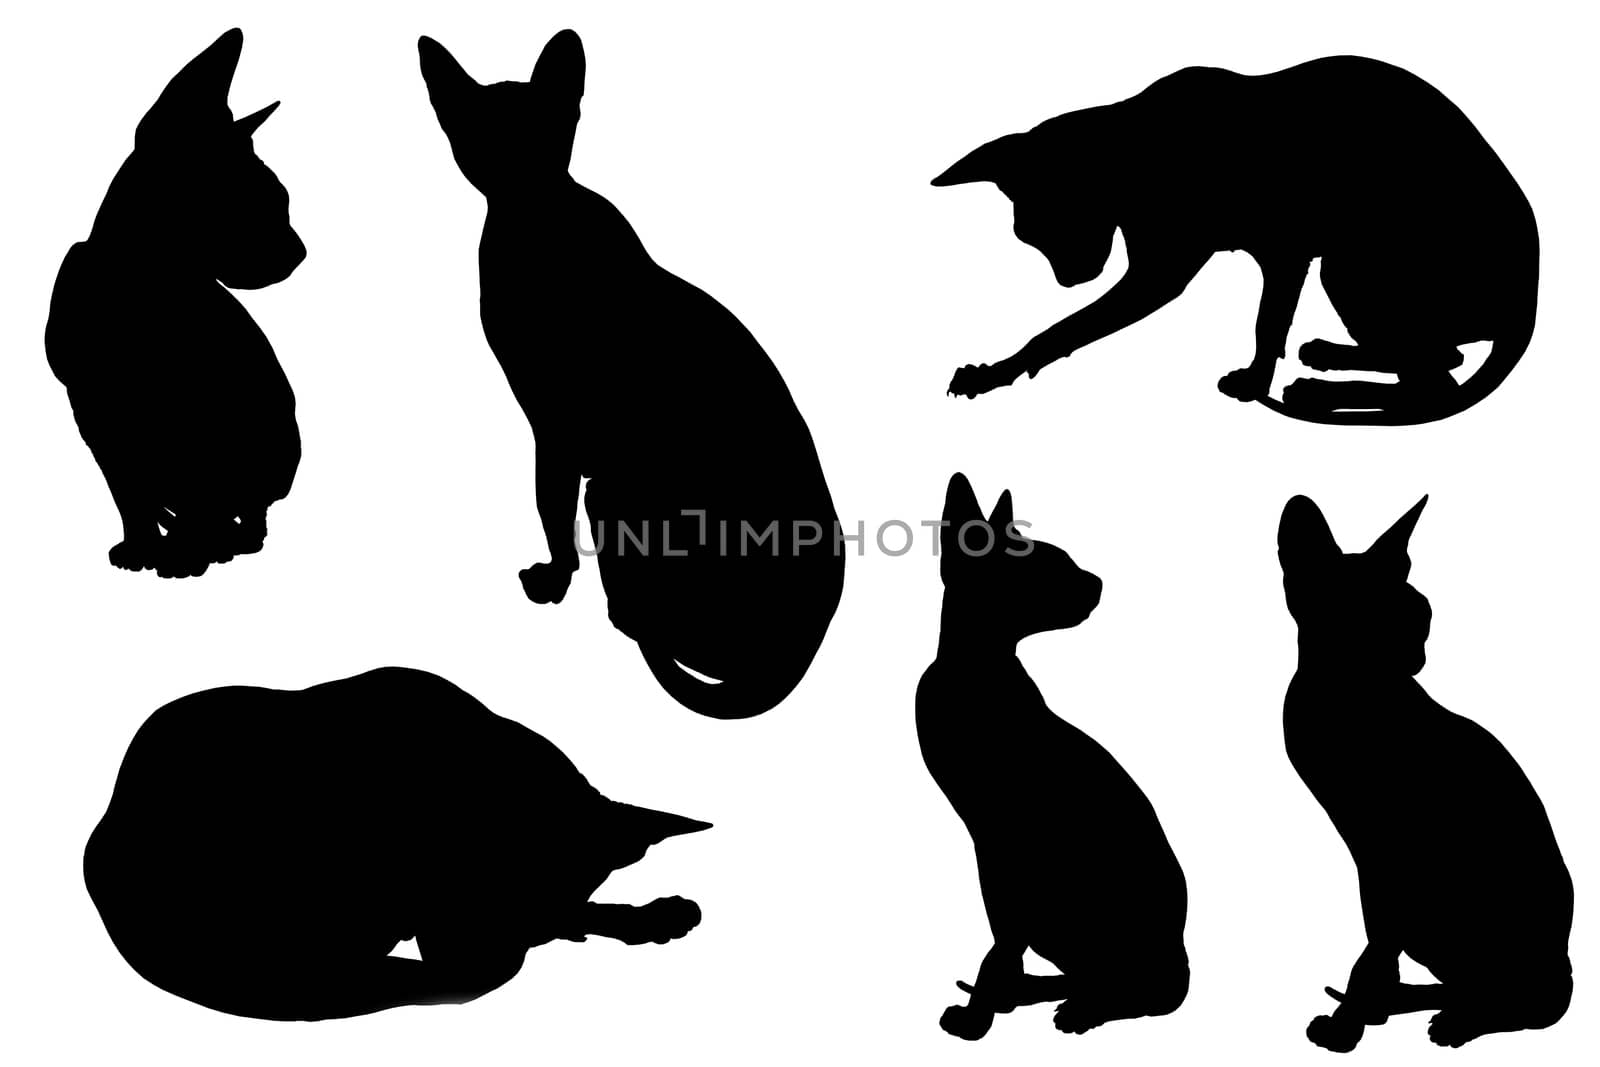 Cat silhouette with shadow, isolated on white background.